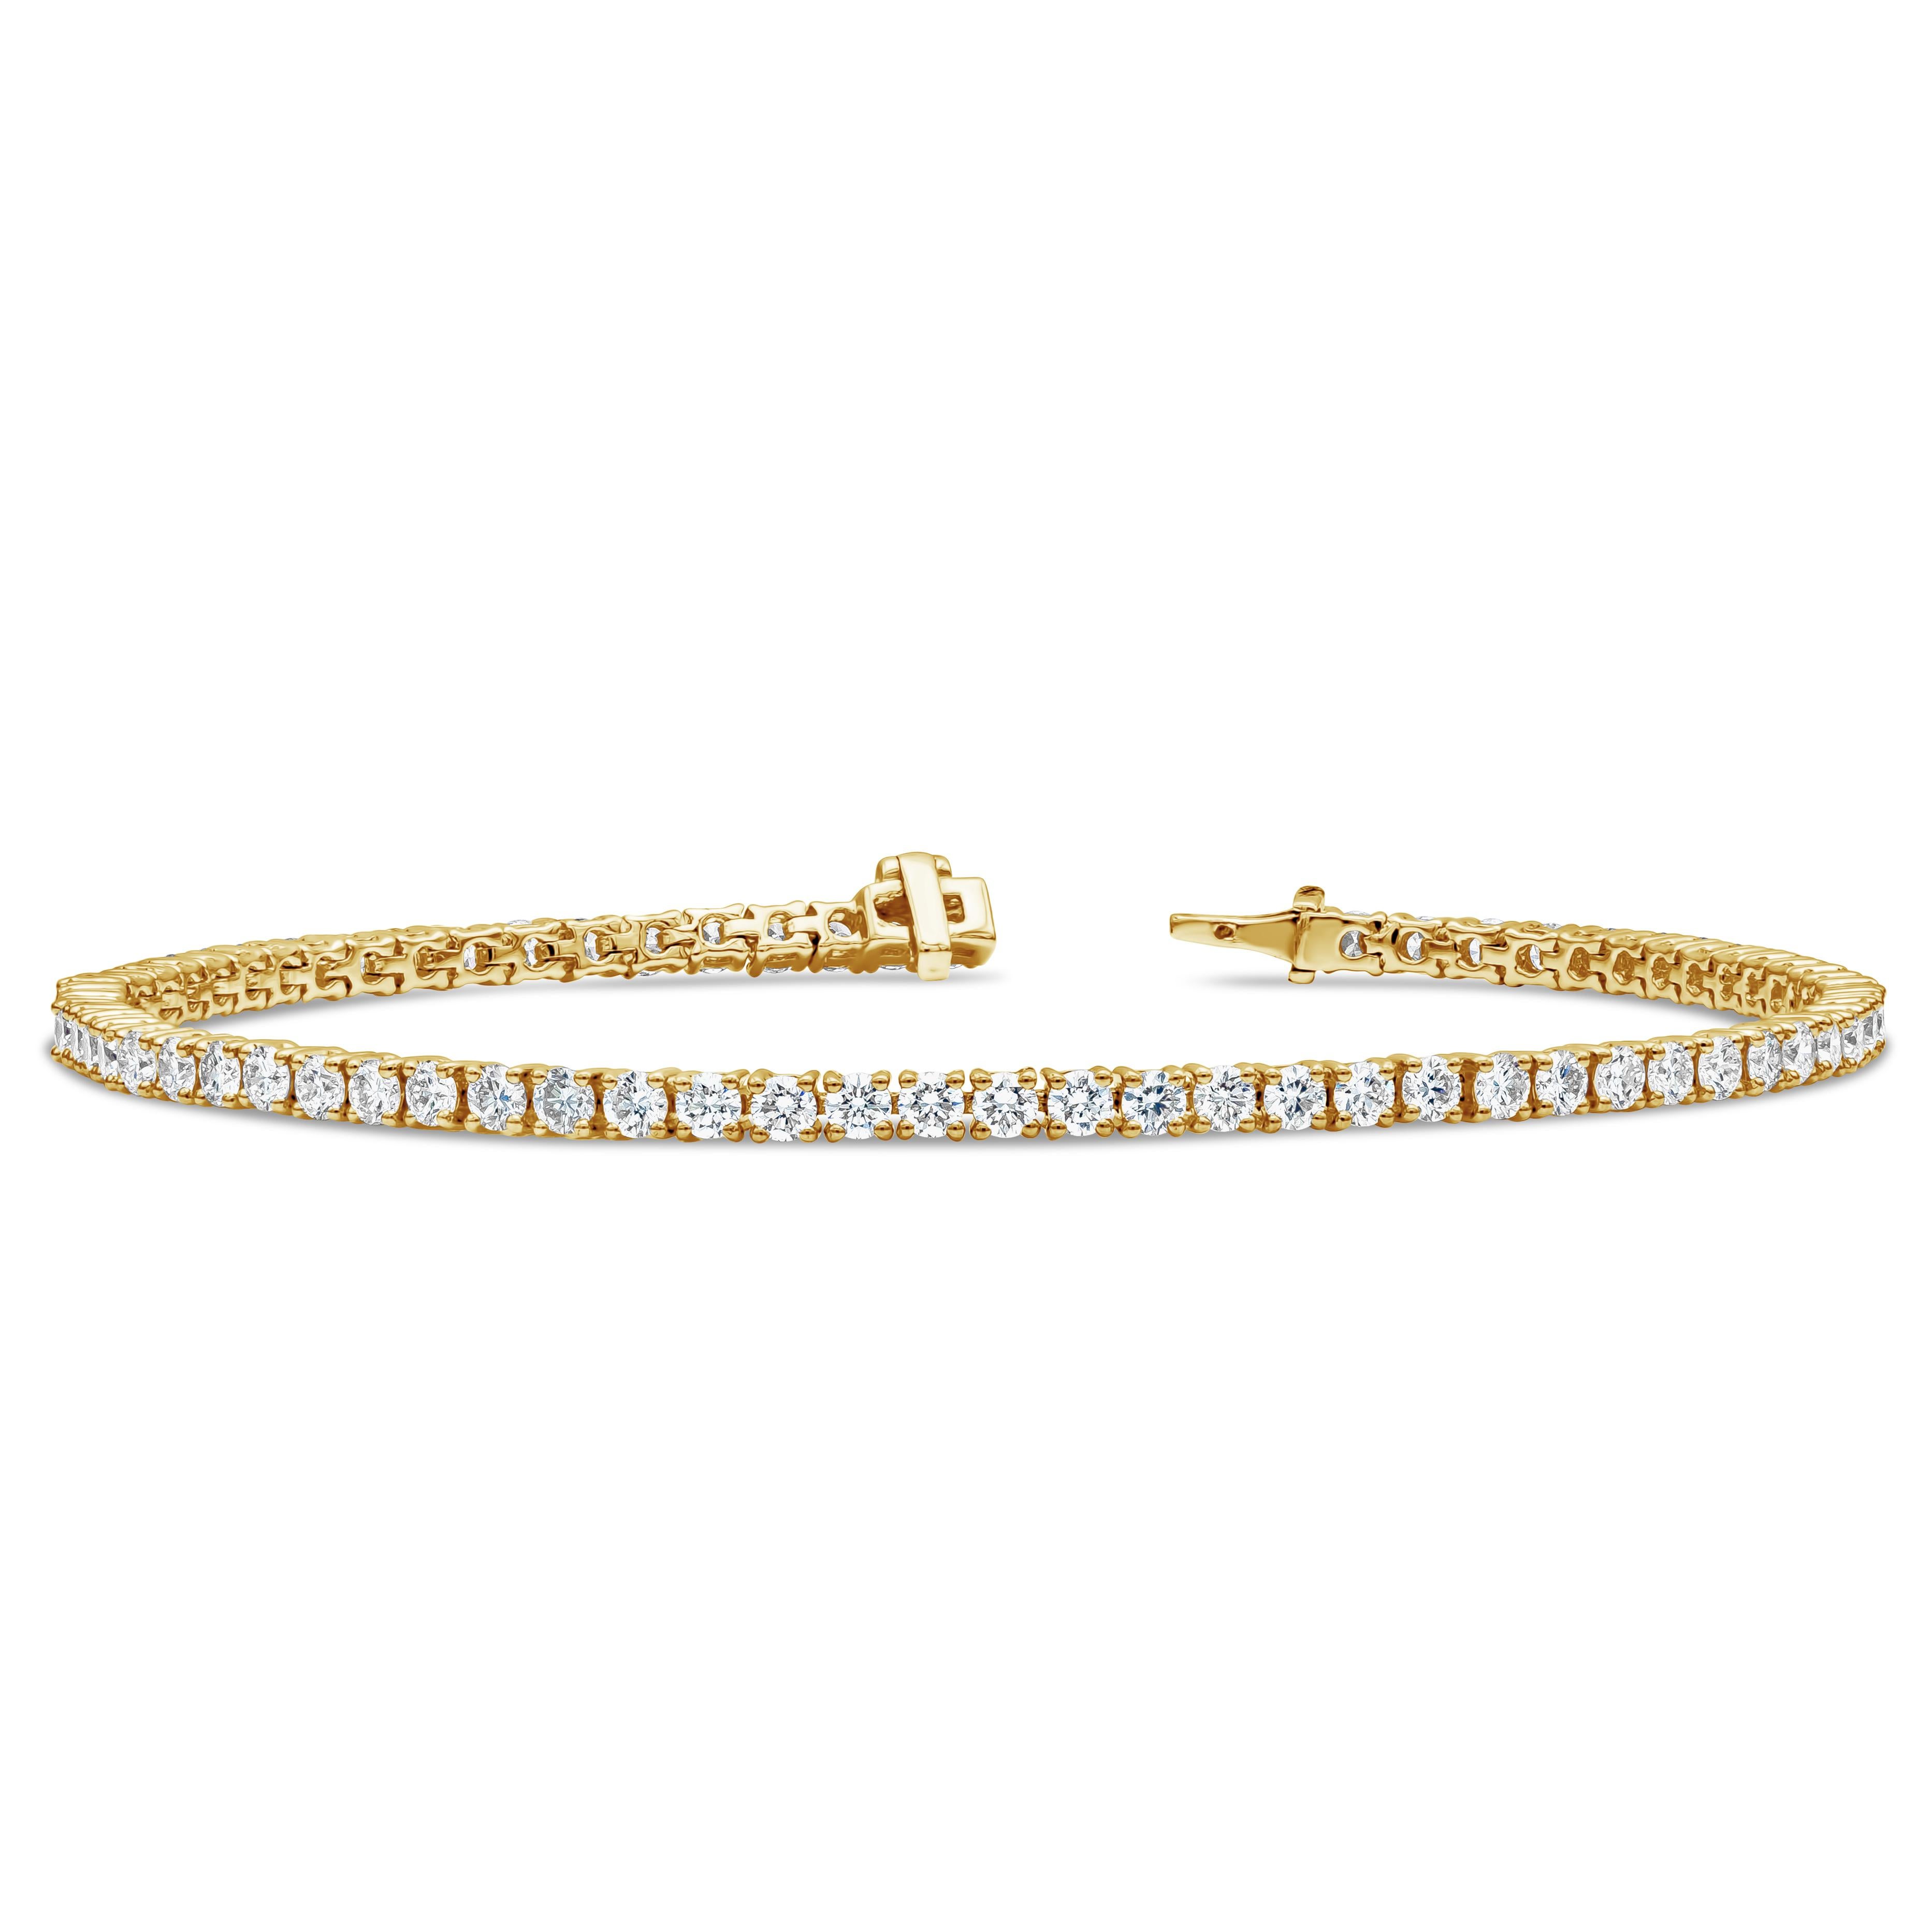 ﻿A classic tennis bracelet style showcasing 76 round brilliant diamonds, Diamonds weigh 3.07 carats total and are approximately F color and VS clarity. 7 inches in Length. 2.15mm in Width. Made with 18K Yellow Gold

Roman Malakov is a custom house,